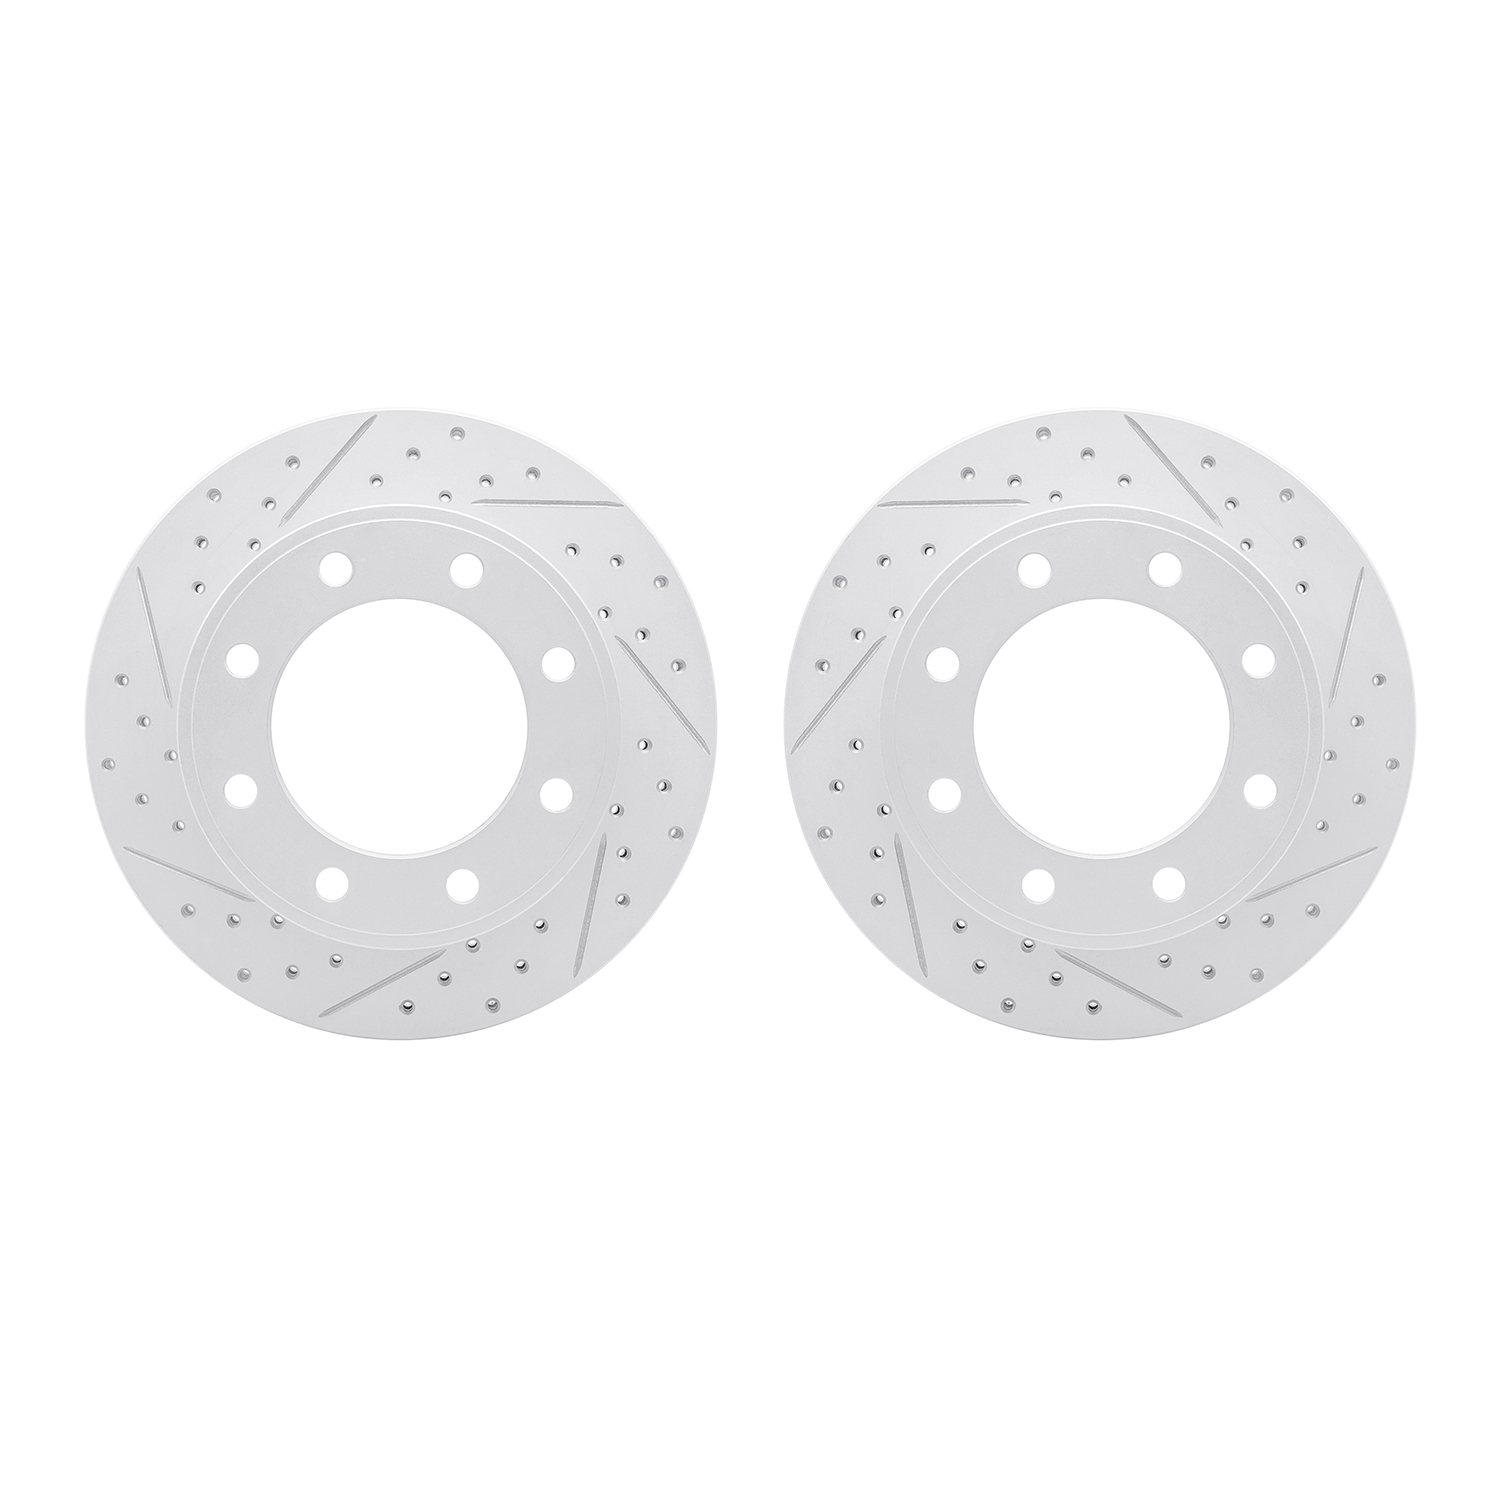 2002-54151 Geoperformance Drilled/Slotted Brake Rotors, 2005-2012 Ford/Lincoln/Mercury/Mazda, Position: Rear